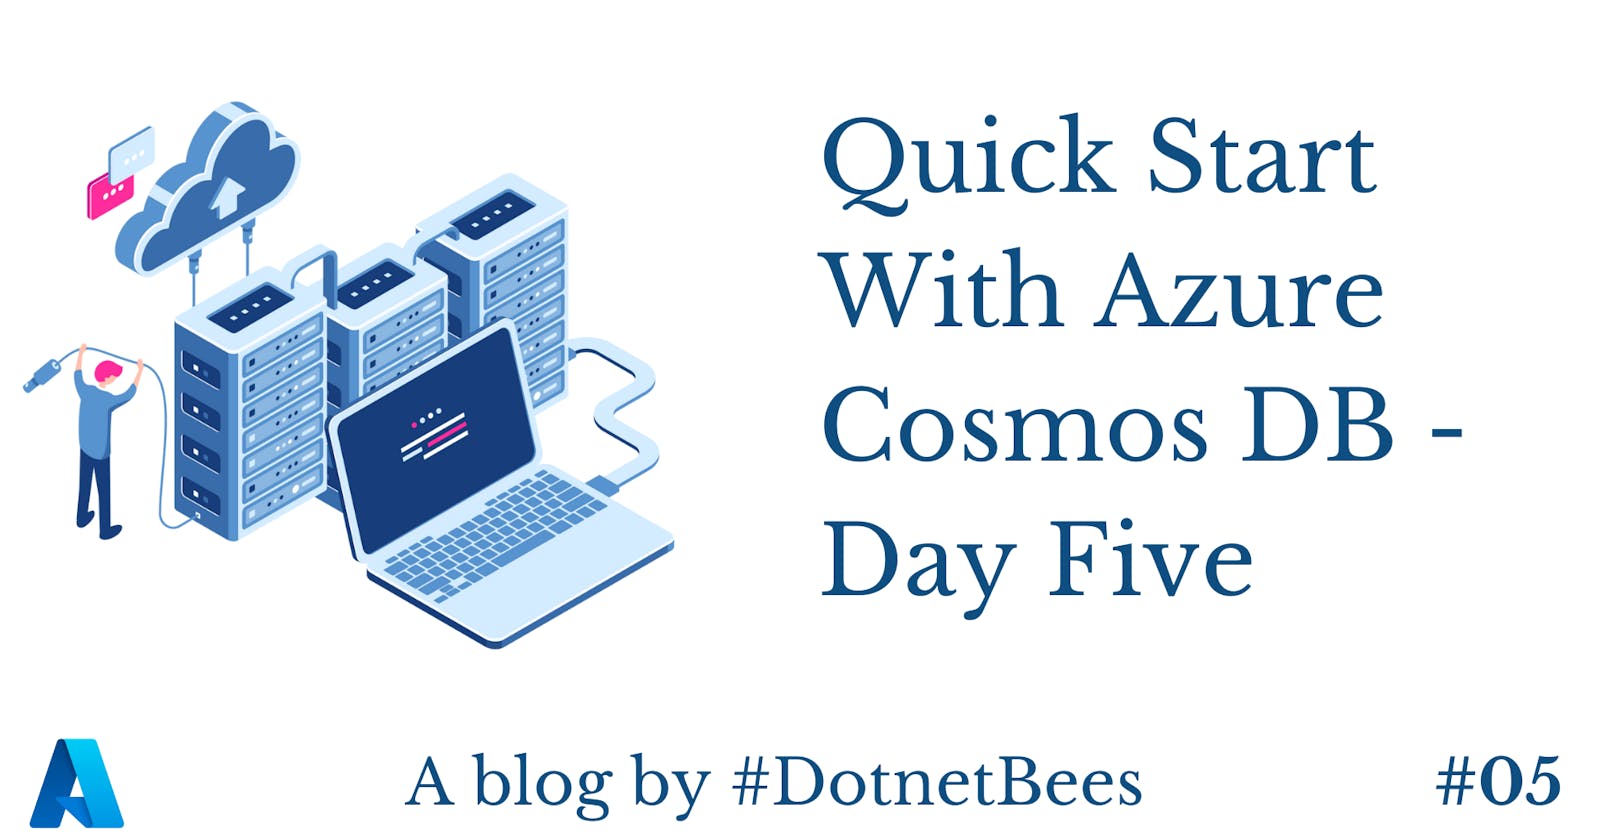 Quick Start With Azure Cosmos DB - Day Five